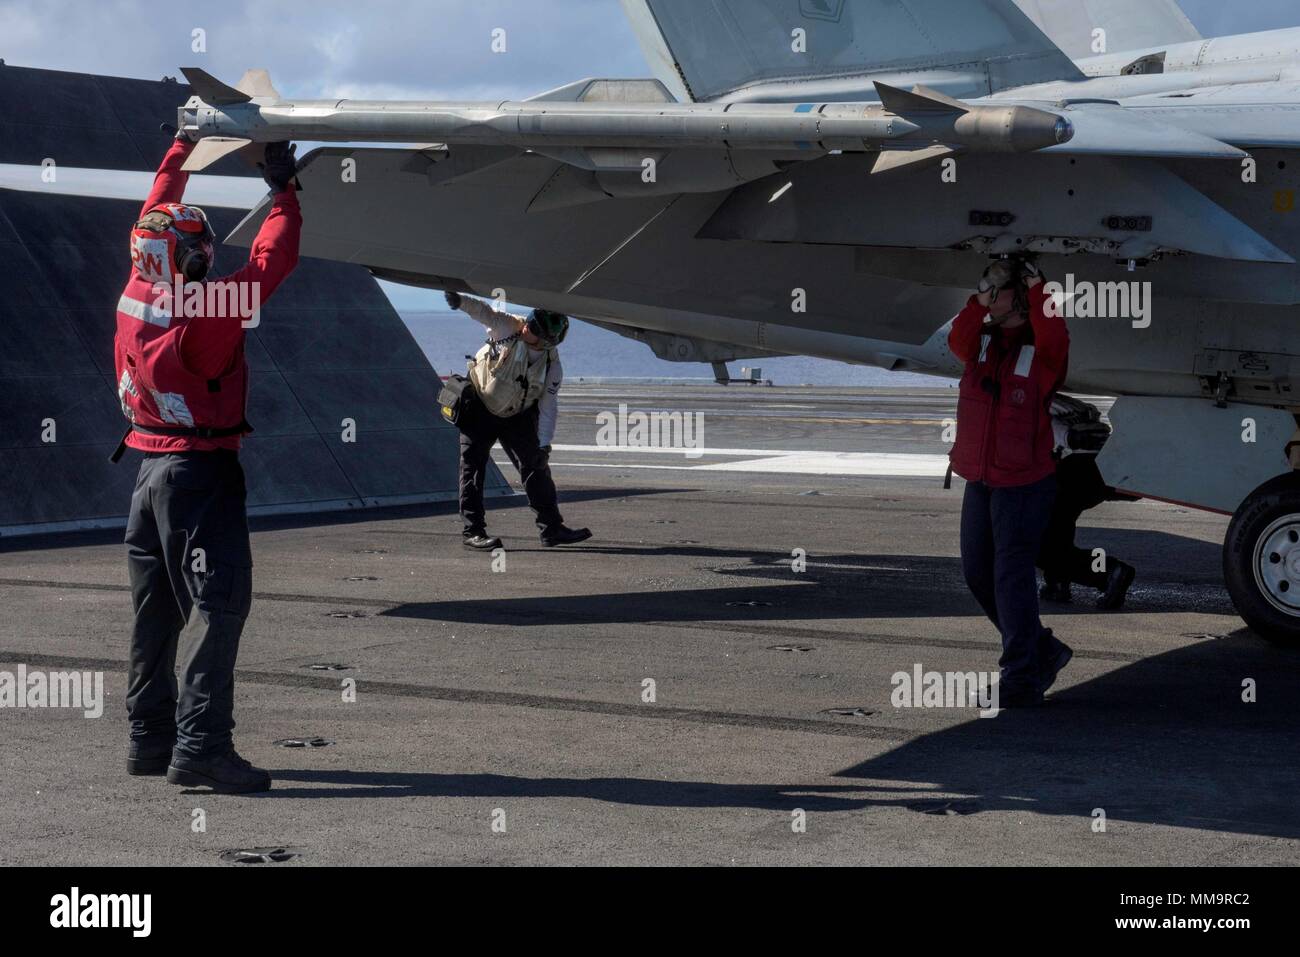 170920-N-OY799-239 PHILIPPINE SEA (Sept. 20, 2017) Aviation Ordnancemen Qiong Wang, from Mountainview California, and Lorena Lucio, from Brownsville, Texas, inspect ordnance on an F/A-18E Super Hornet, assigned to Strike Fighter Squadron (VFA) 27, on the flight deck of the Navy's forward-deployed aircraft carrier, USS Ronald Reagan (CVN 76).  Ronald Reagan, the flagship of Carrier Strike Group 5, provides a combat-ready force that protects and defends the collective maritime interests of its allies and partners in the Indo-Asia-Pacific region.  (U.S. Navy photo by Mass Communication Specialist Stock Photo